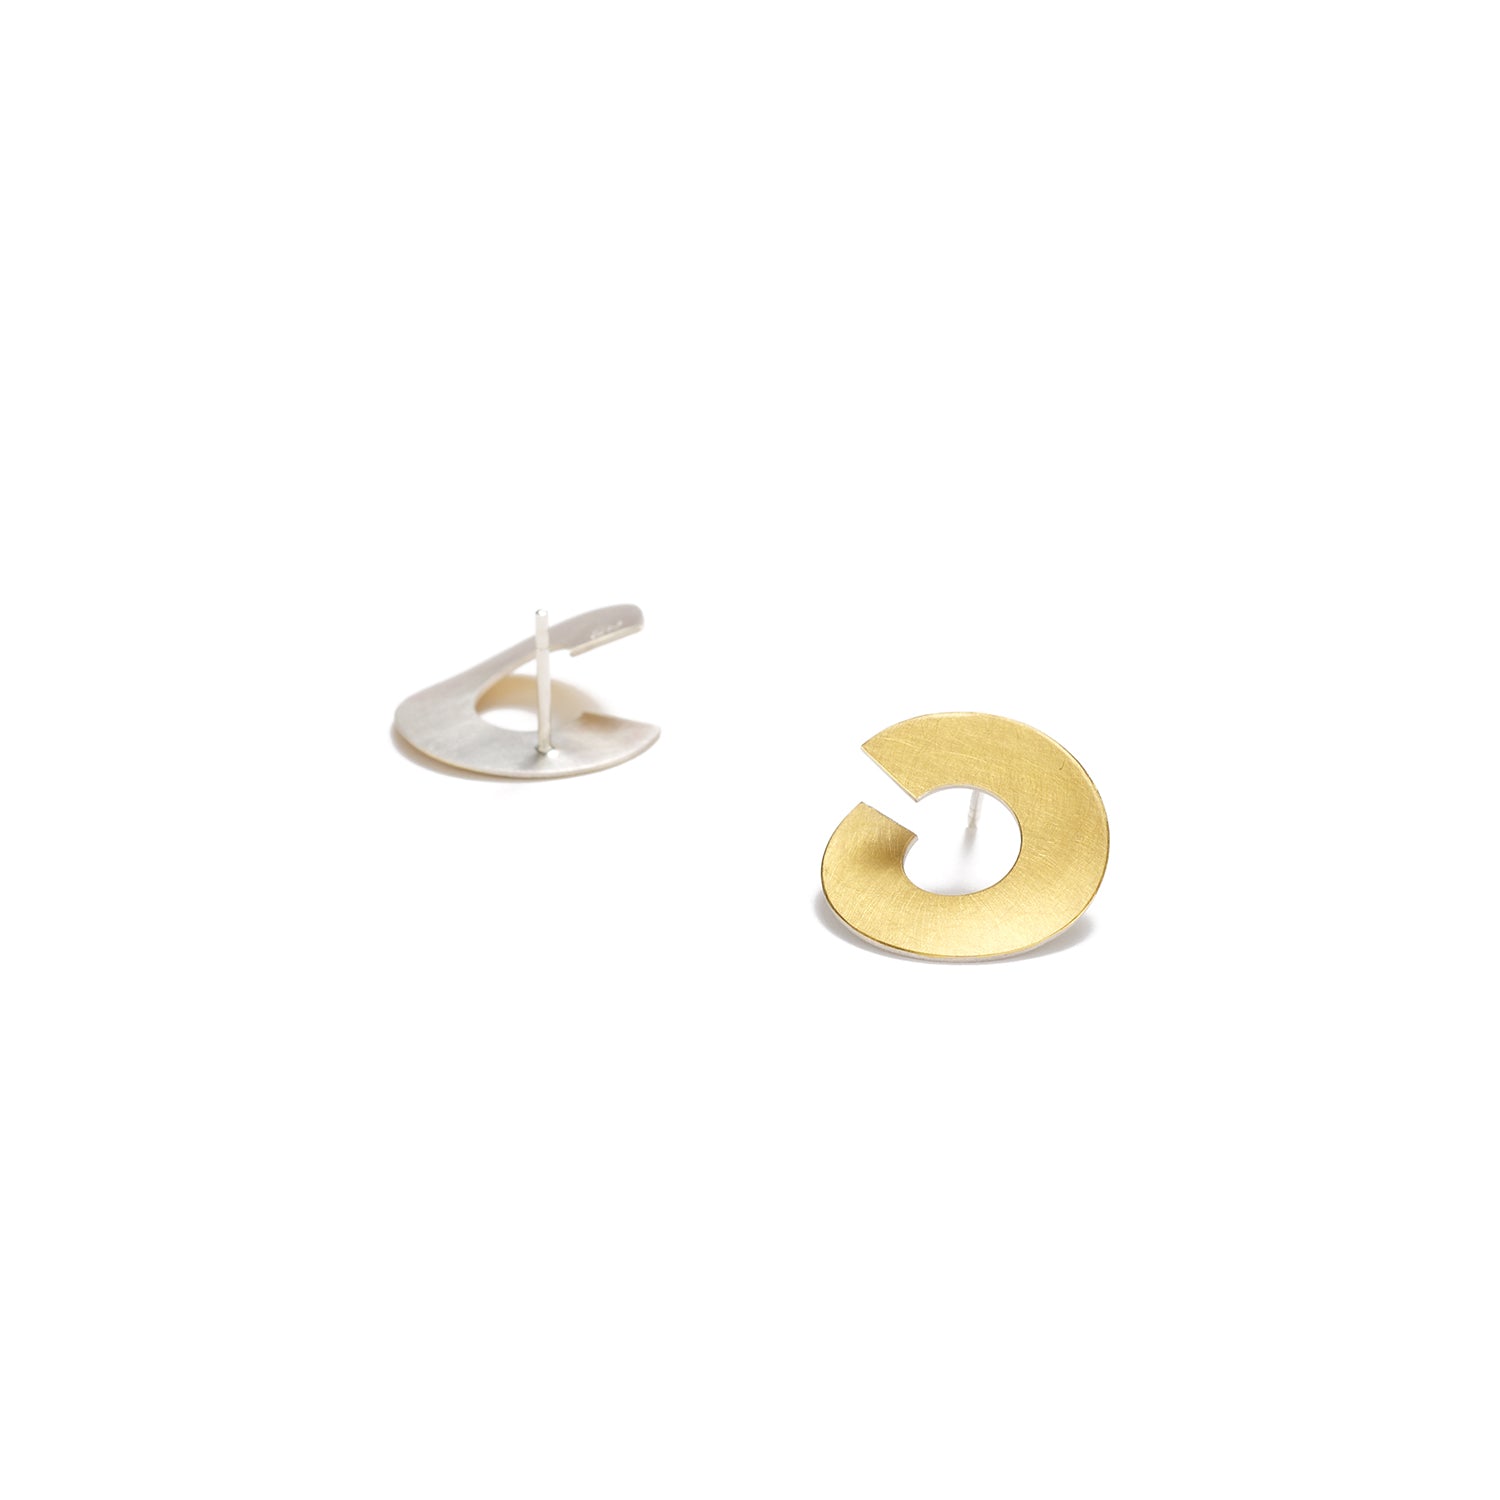 Small Interrupted Circle Gold Earrings